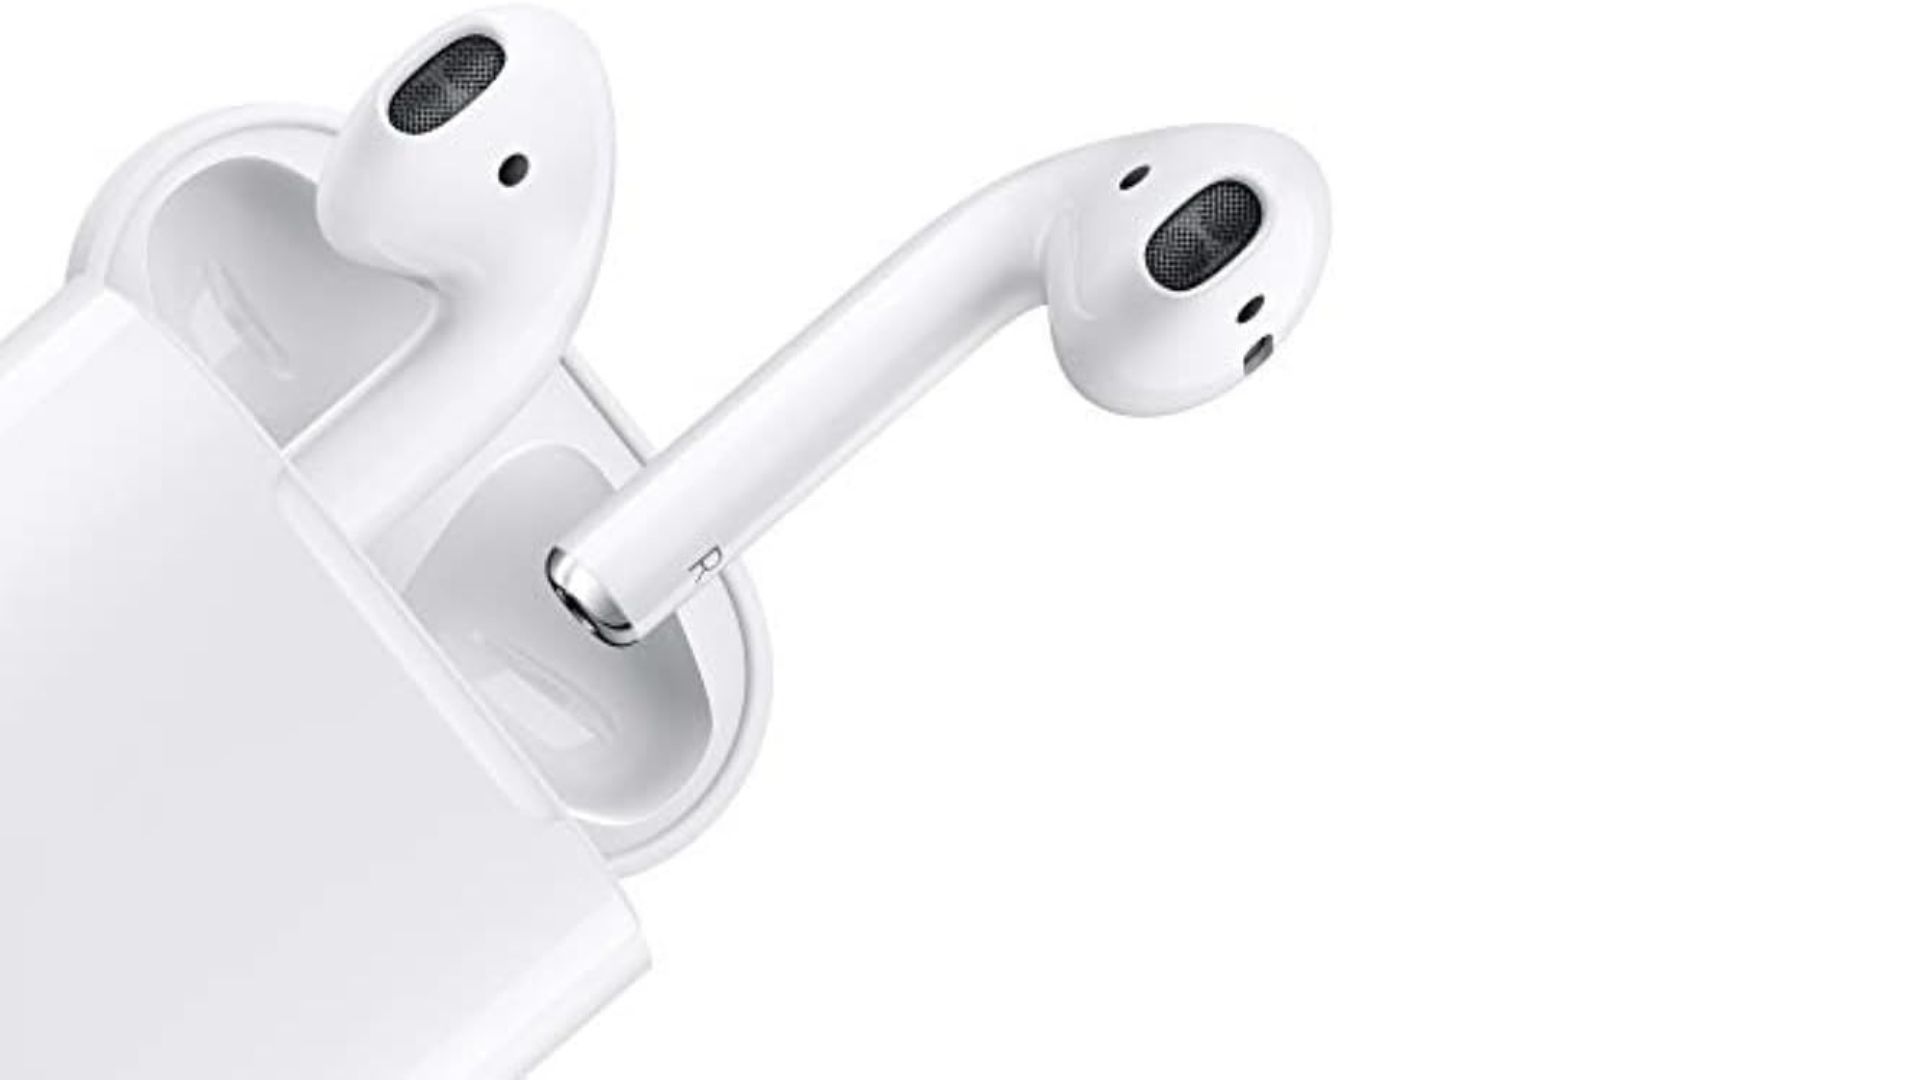 The Apple AirPods 2